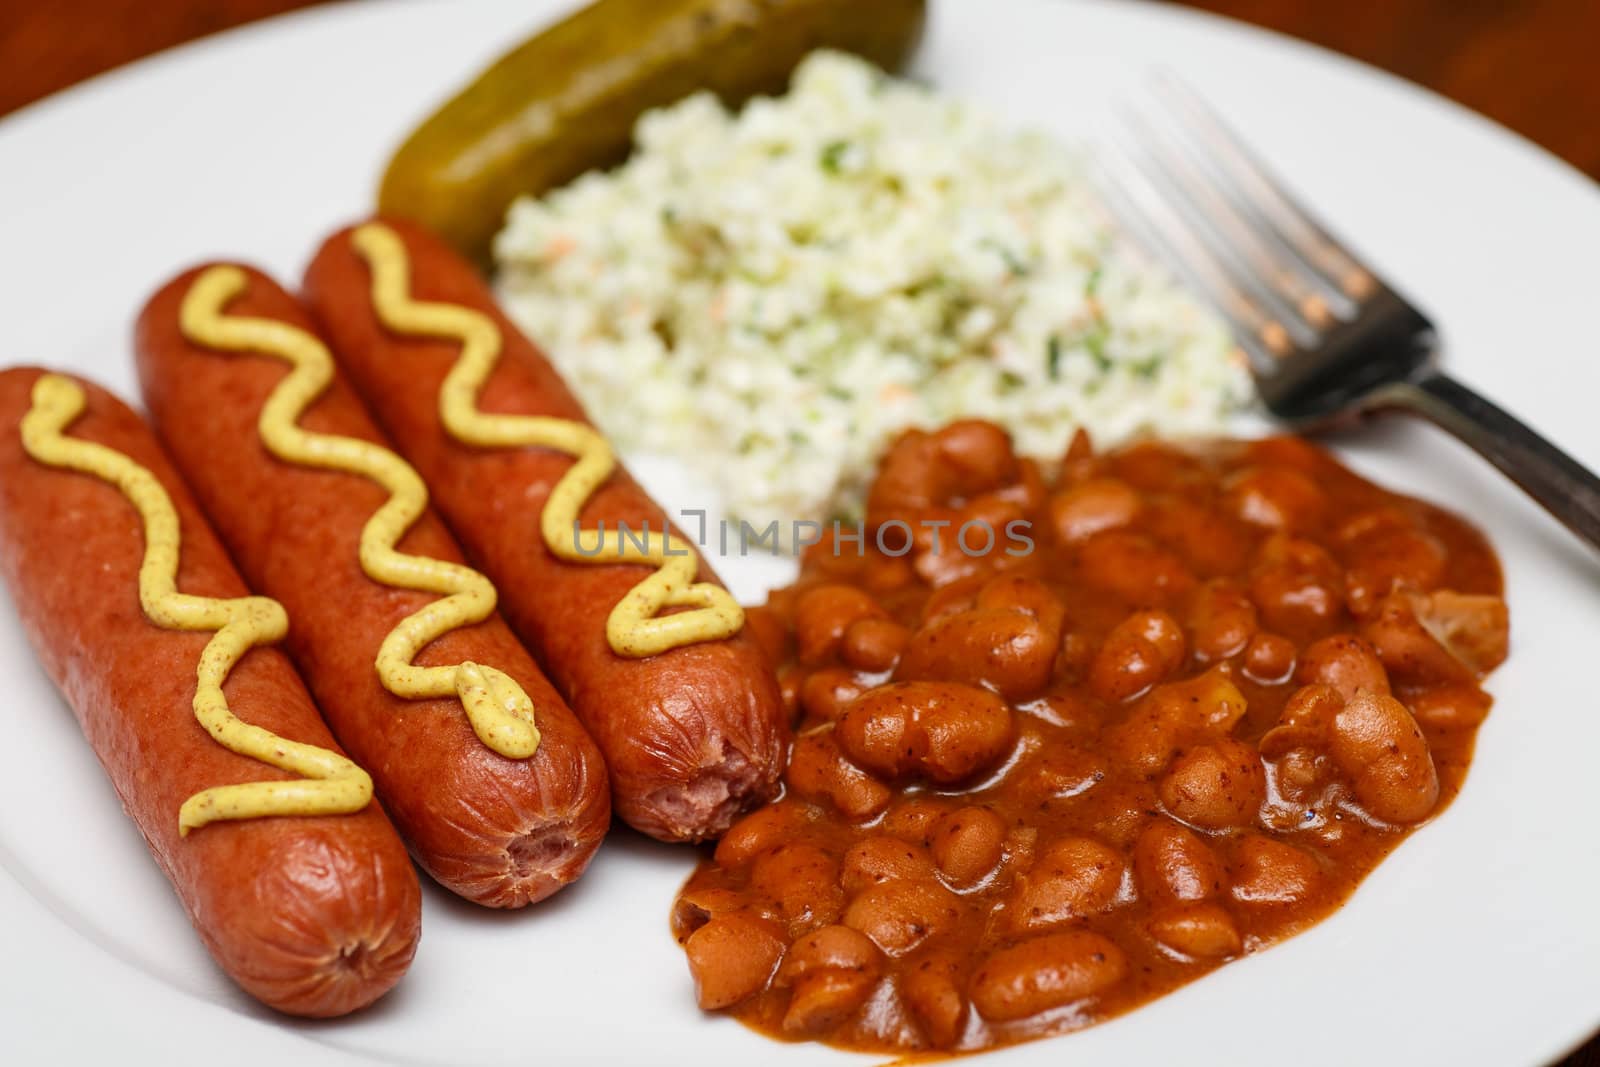 Fransk and Beans with Coleslaw and Pickle by dbvirago